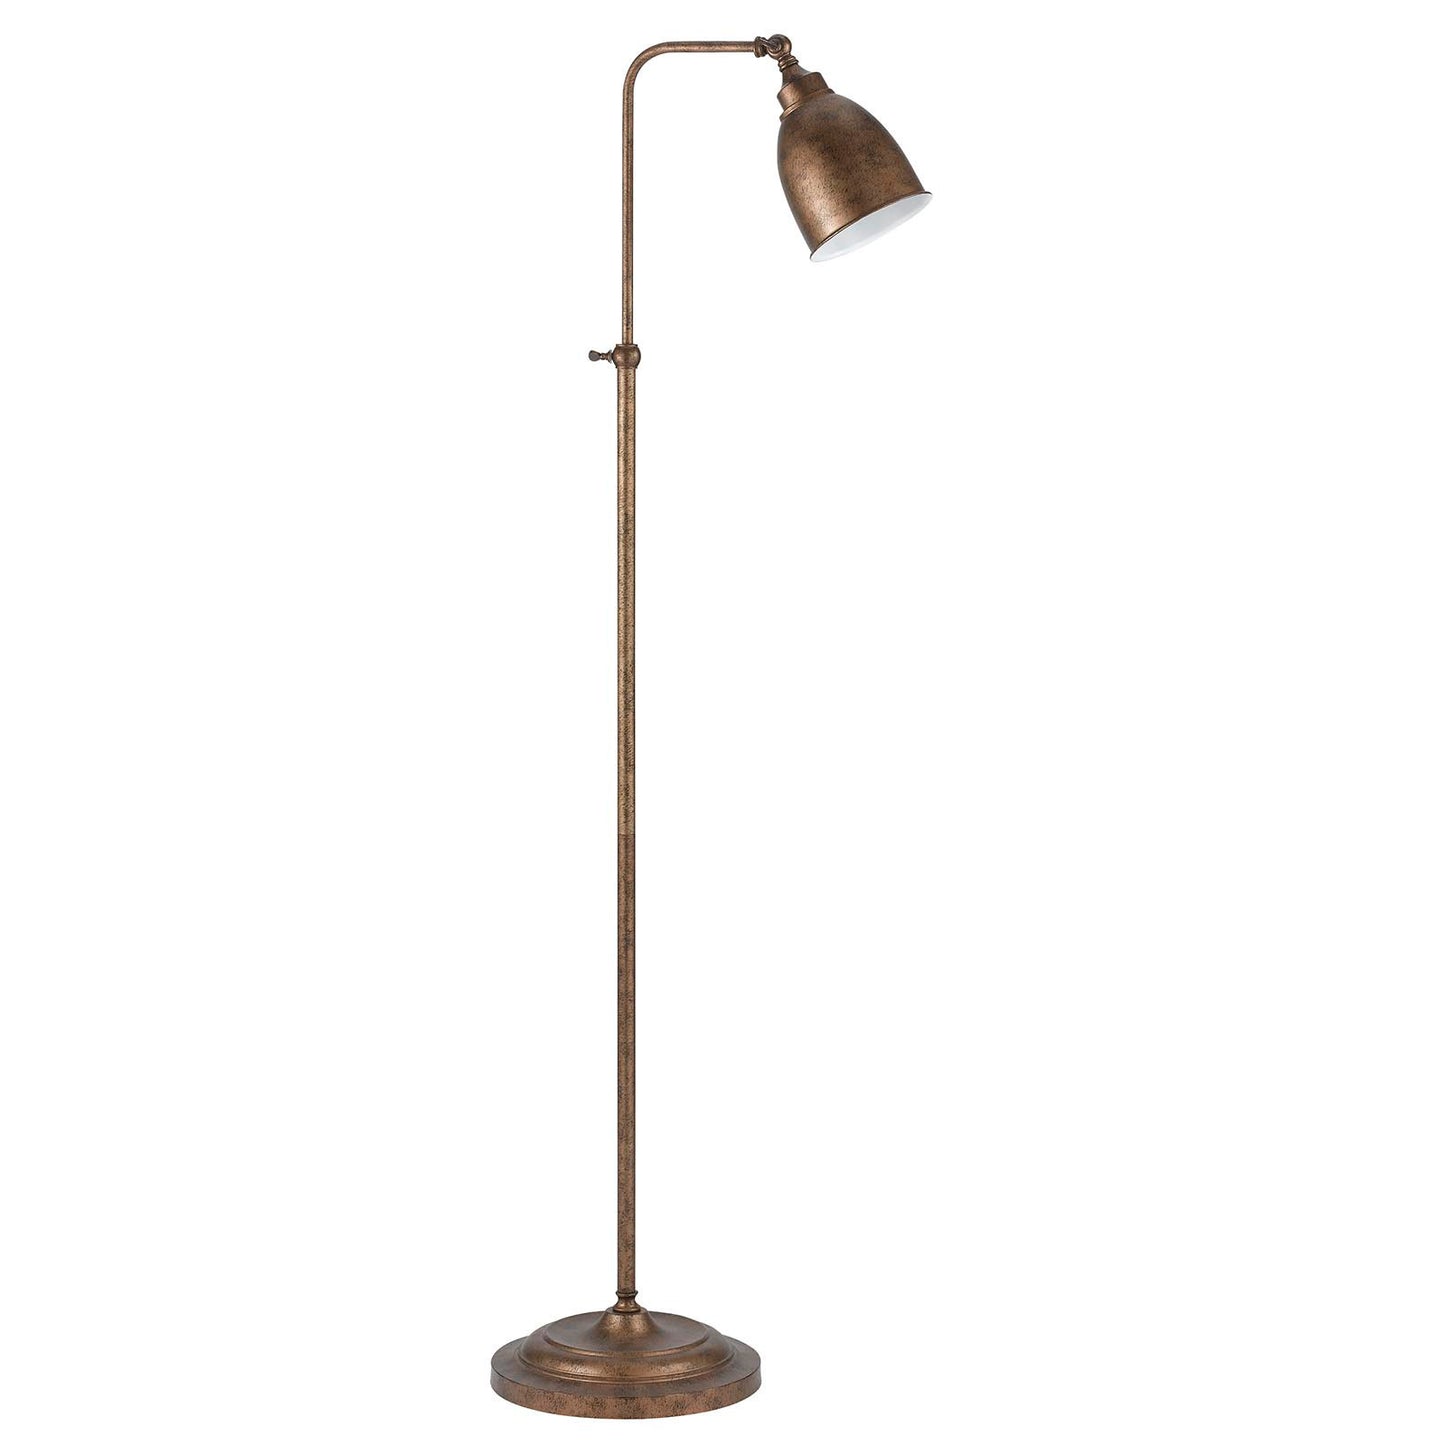 62" Rusted Adjustable Traditional Shaped Floor Lamp With Rust Dome Shade